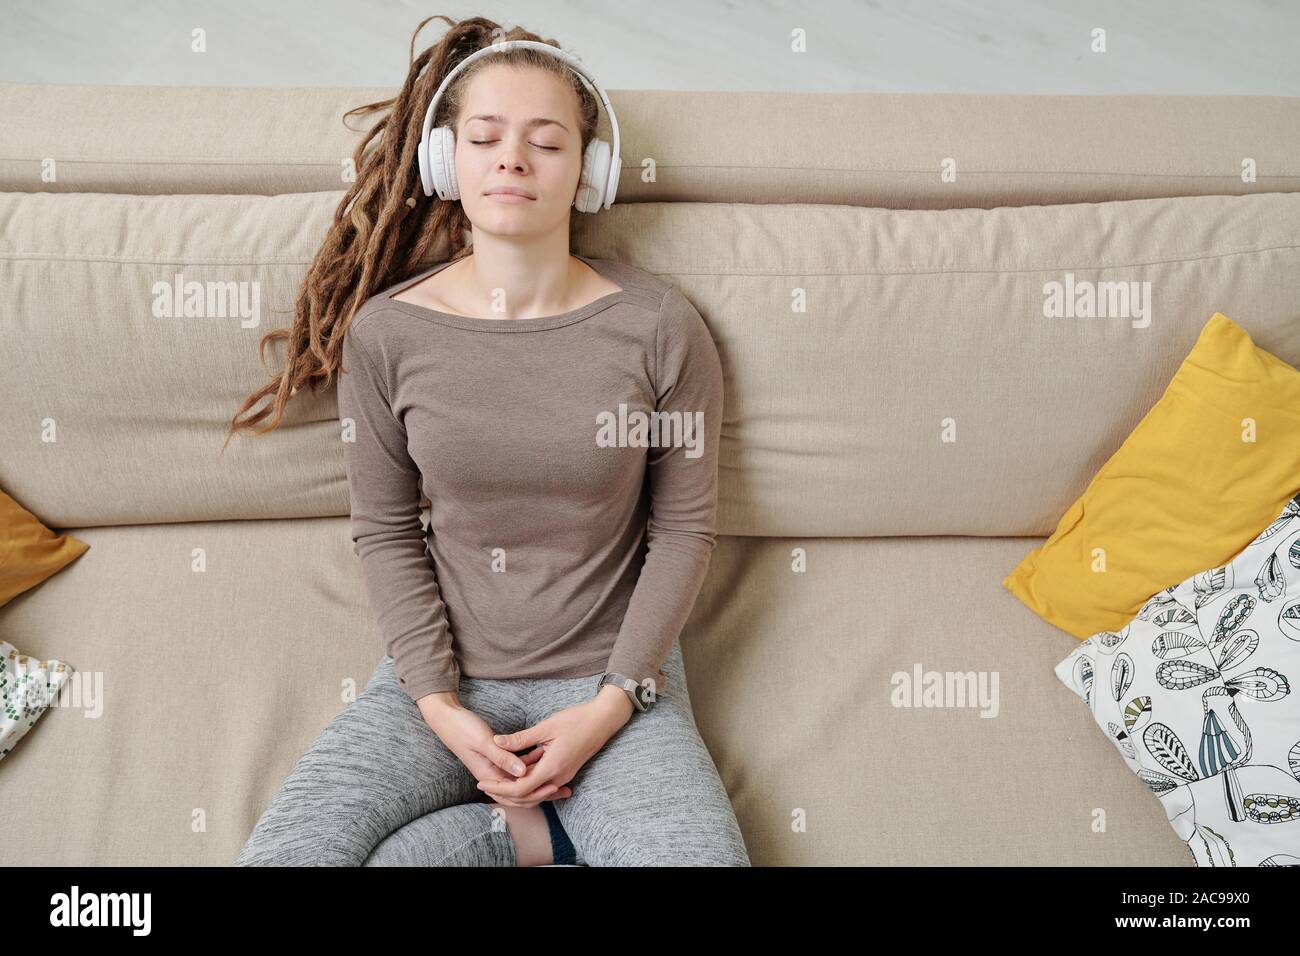 Peaceful young woman with headphones listening to meditation music on couch Stock Photo